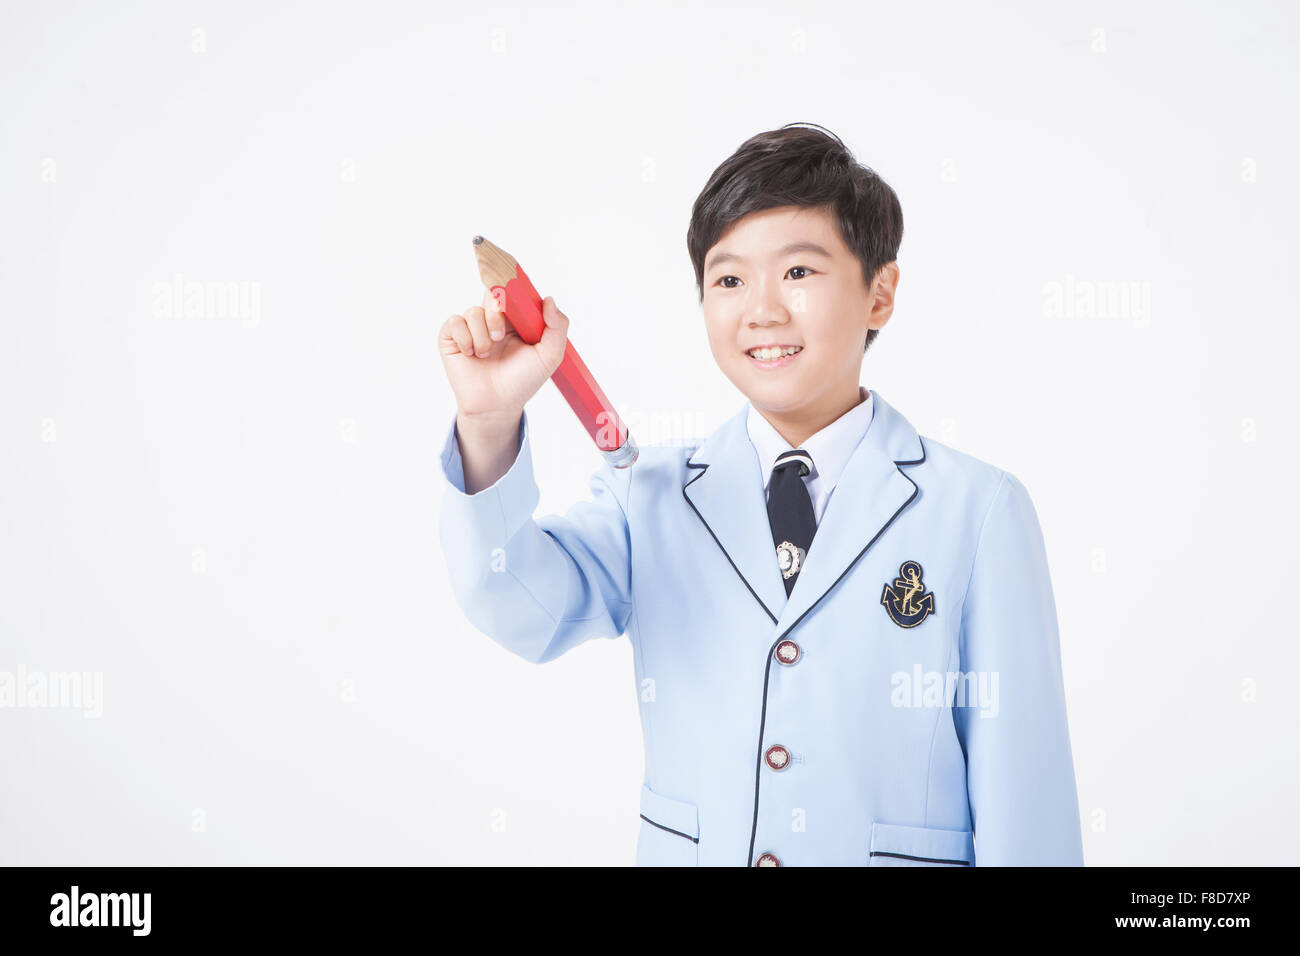 Elementary school age boy holding a big red pencil in his hand with gesture of writing Stock Photo